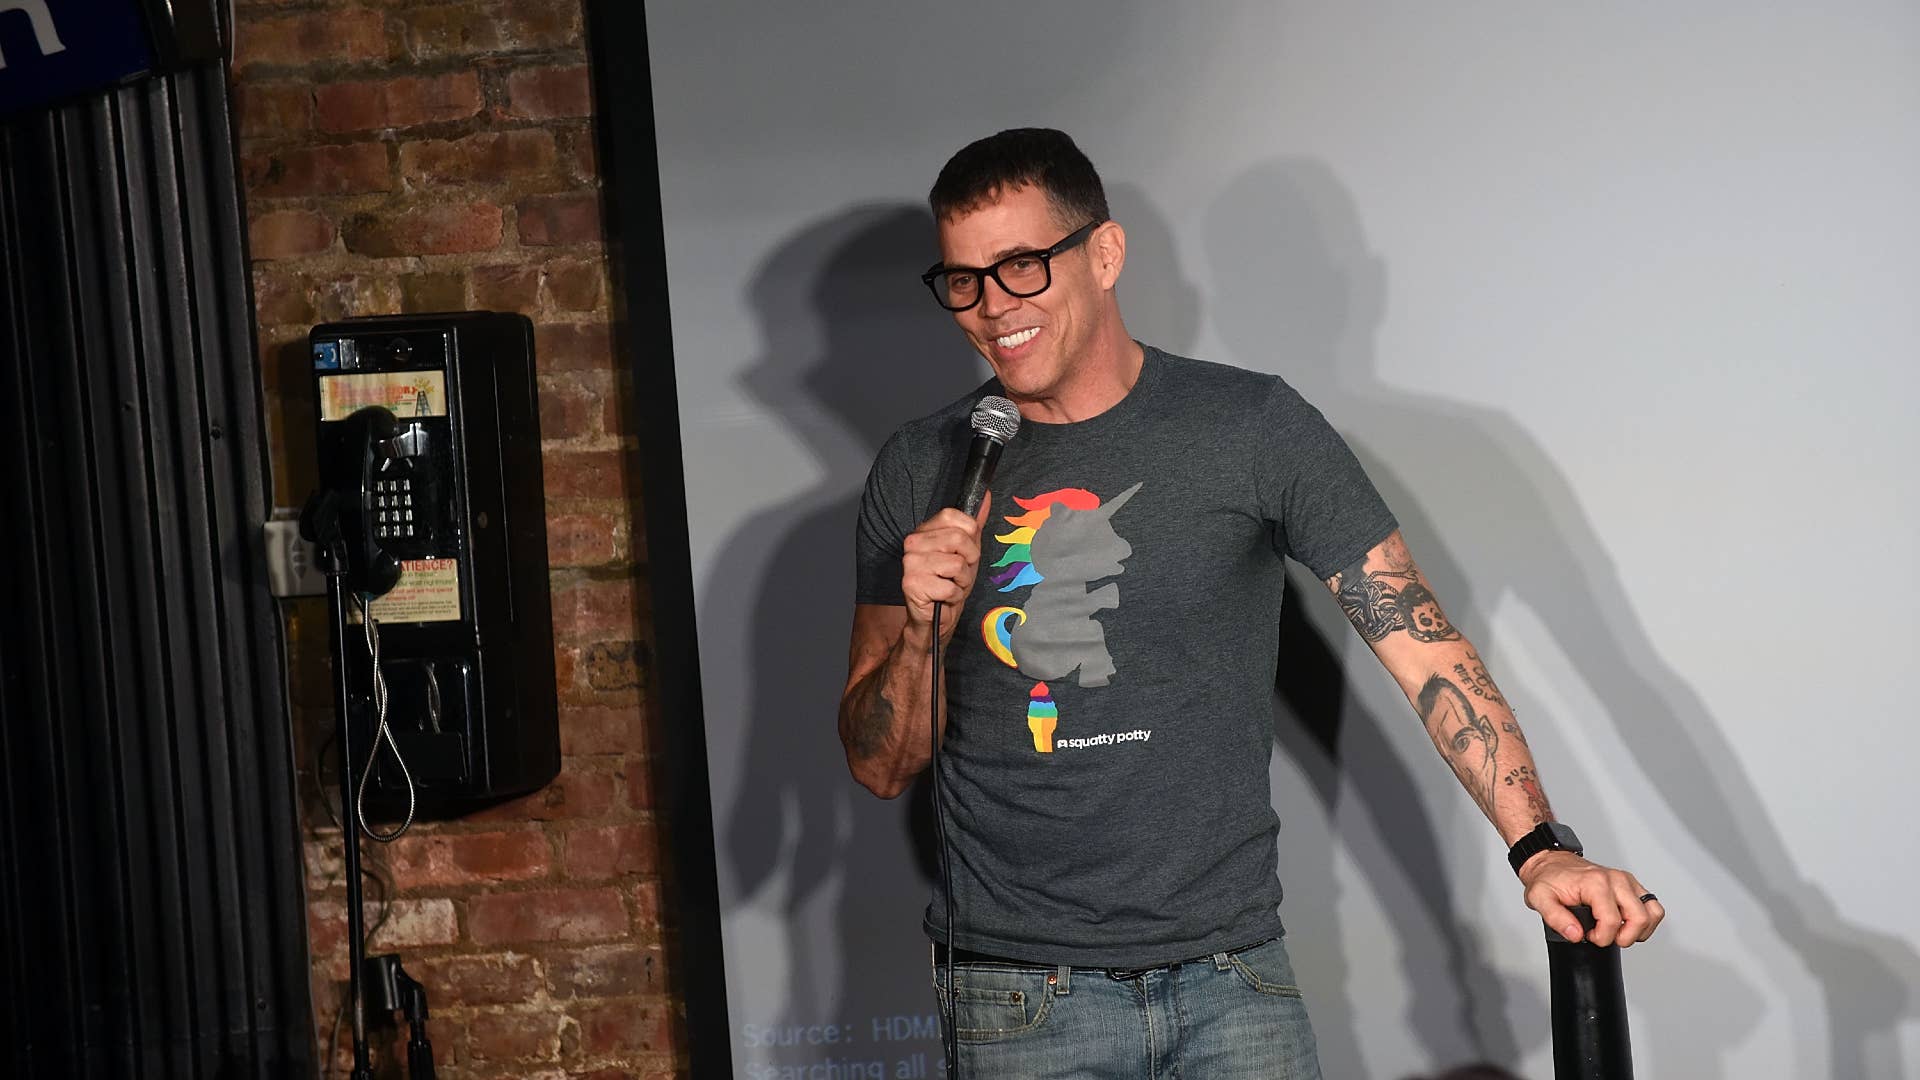 Steve O is pictured performing comedy